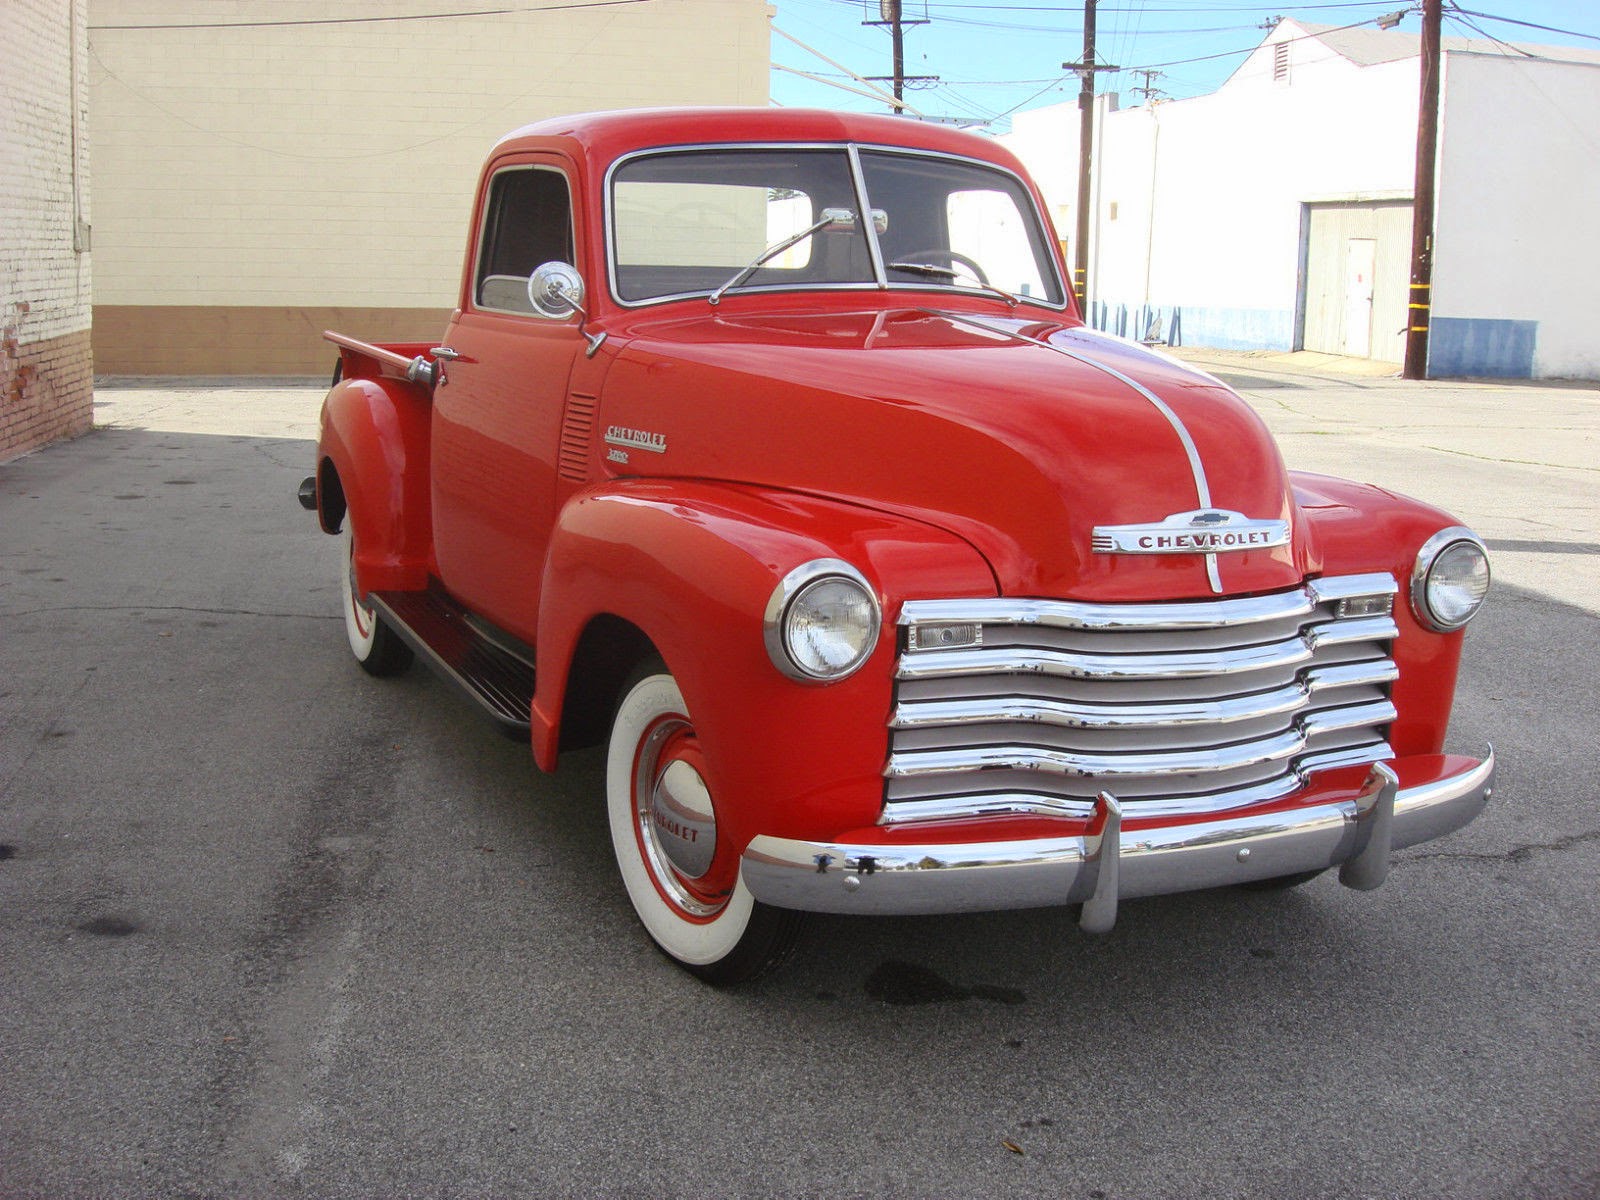 All American Classic Cars: 1950 Chevrolet 3100 Pickup Truck